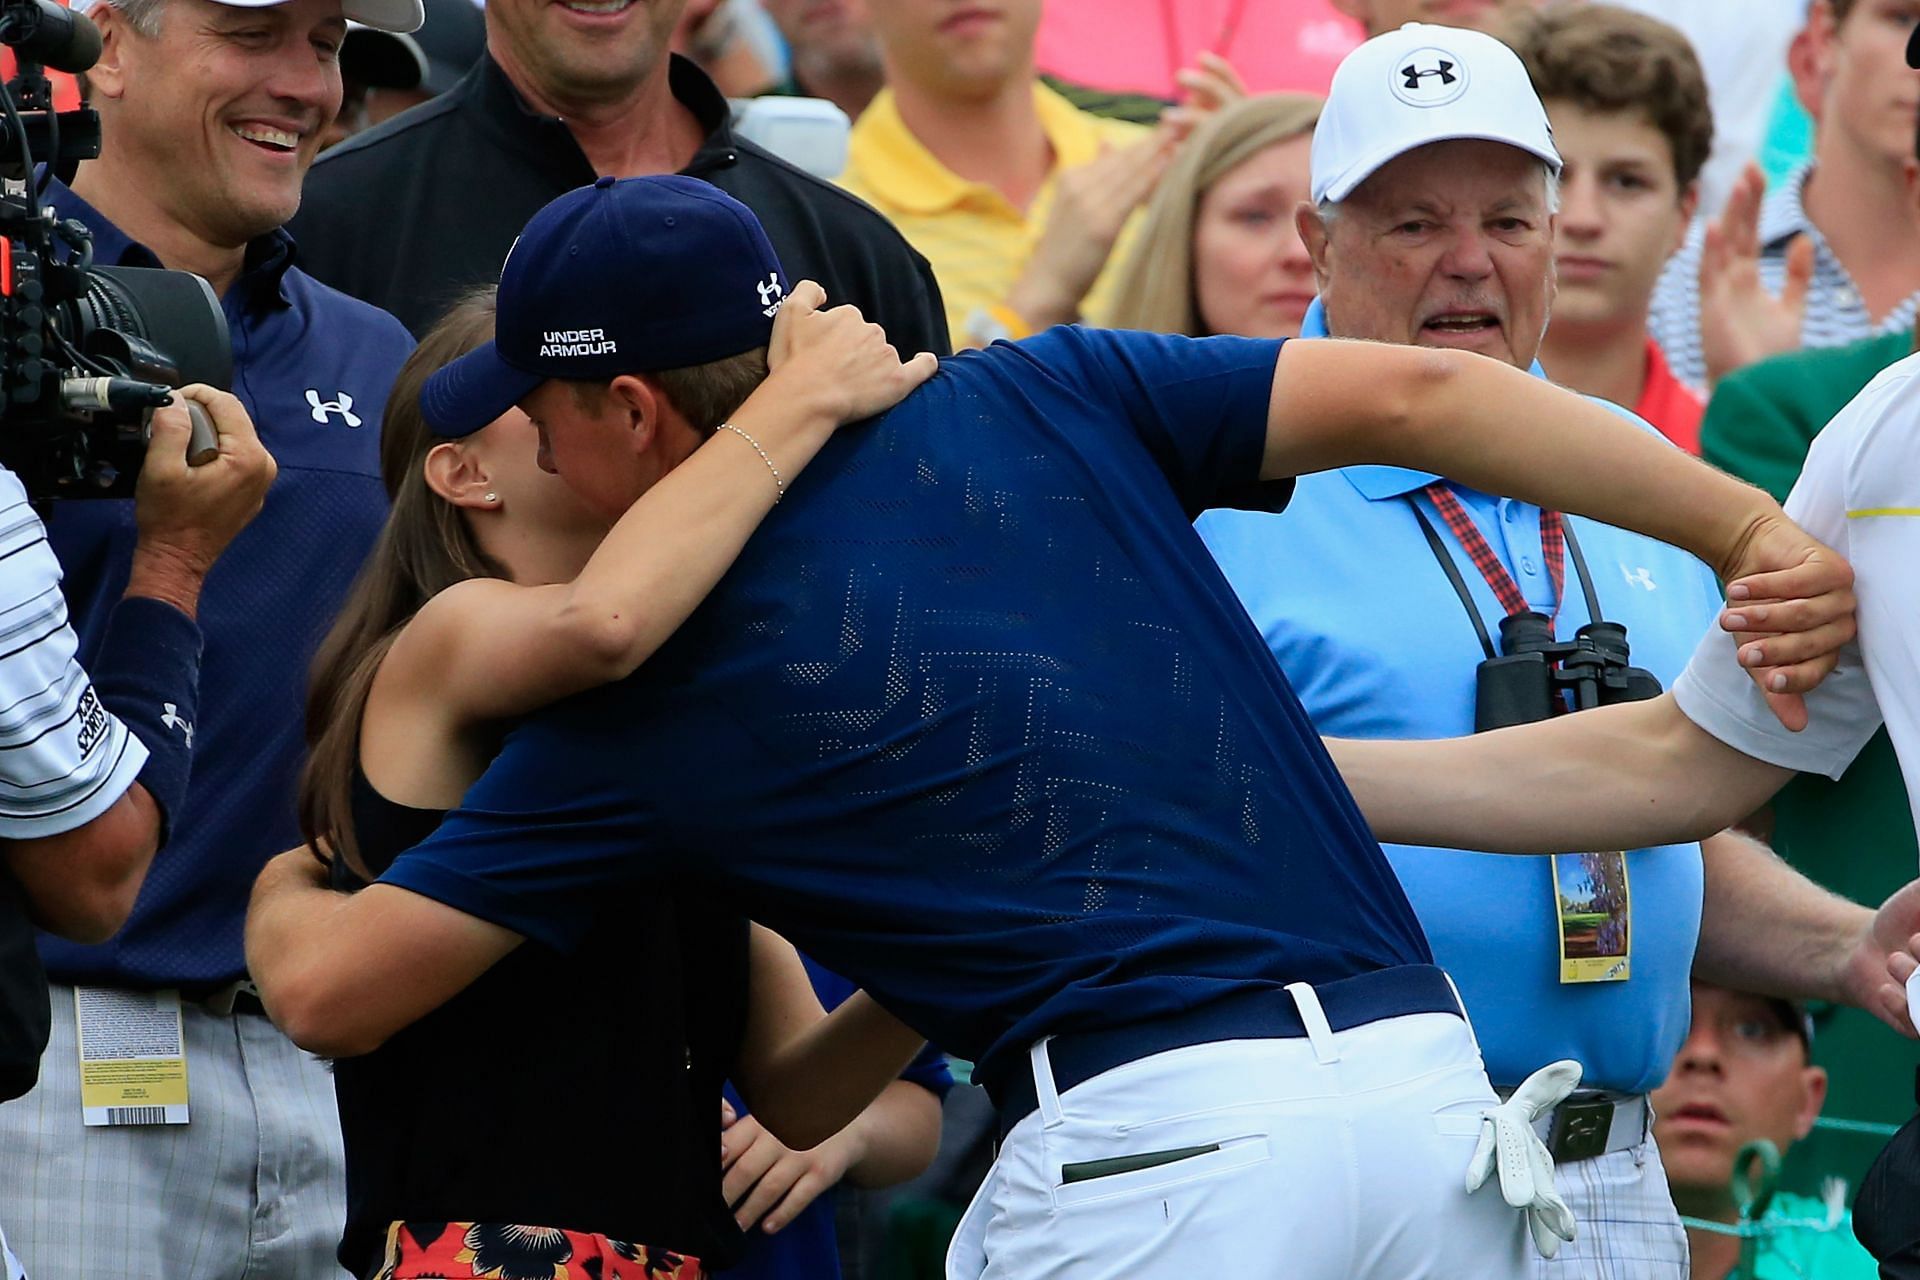 Jordan Spieth and Annie Verret at The Masters - Final Round (Image via Jamie Squire/Getty Images)